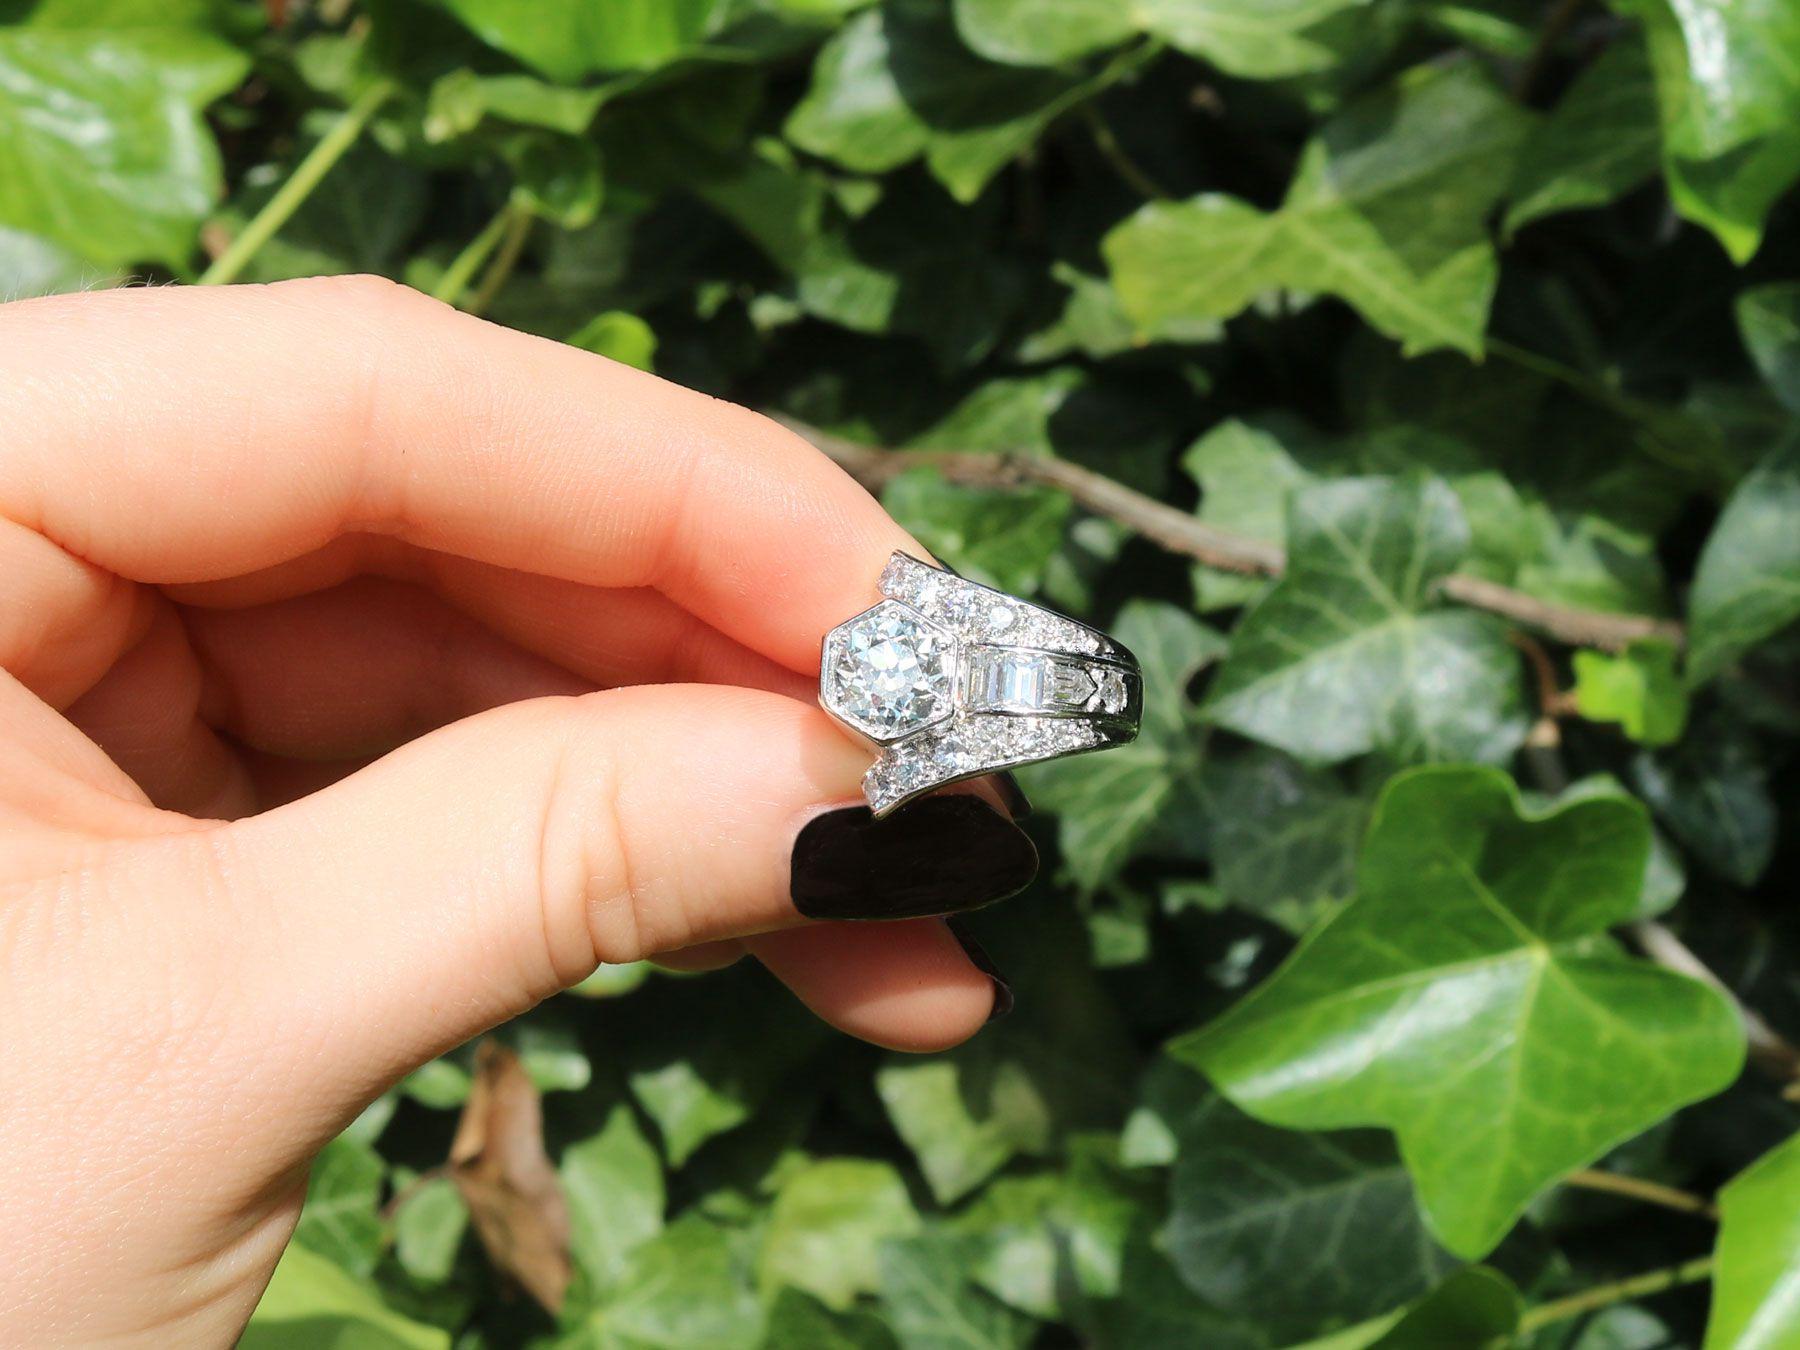 A stunning antique Art Deco 3.24 carat diamond and platinum cocktail ring; part of our diverse antique jewelry and estate jewelry collections.

This stunning, fine and impressive Art Deco ring has been crafted in platinum.

The asymmetric and